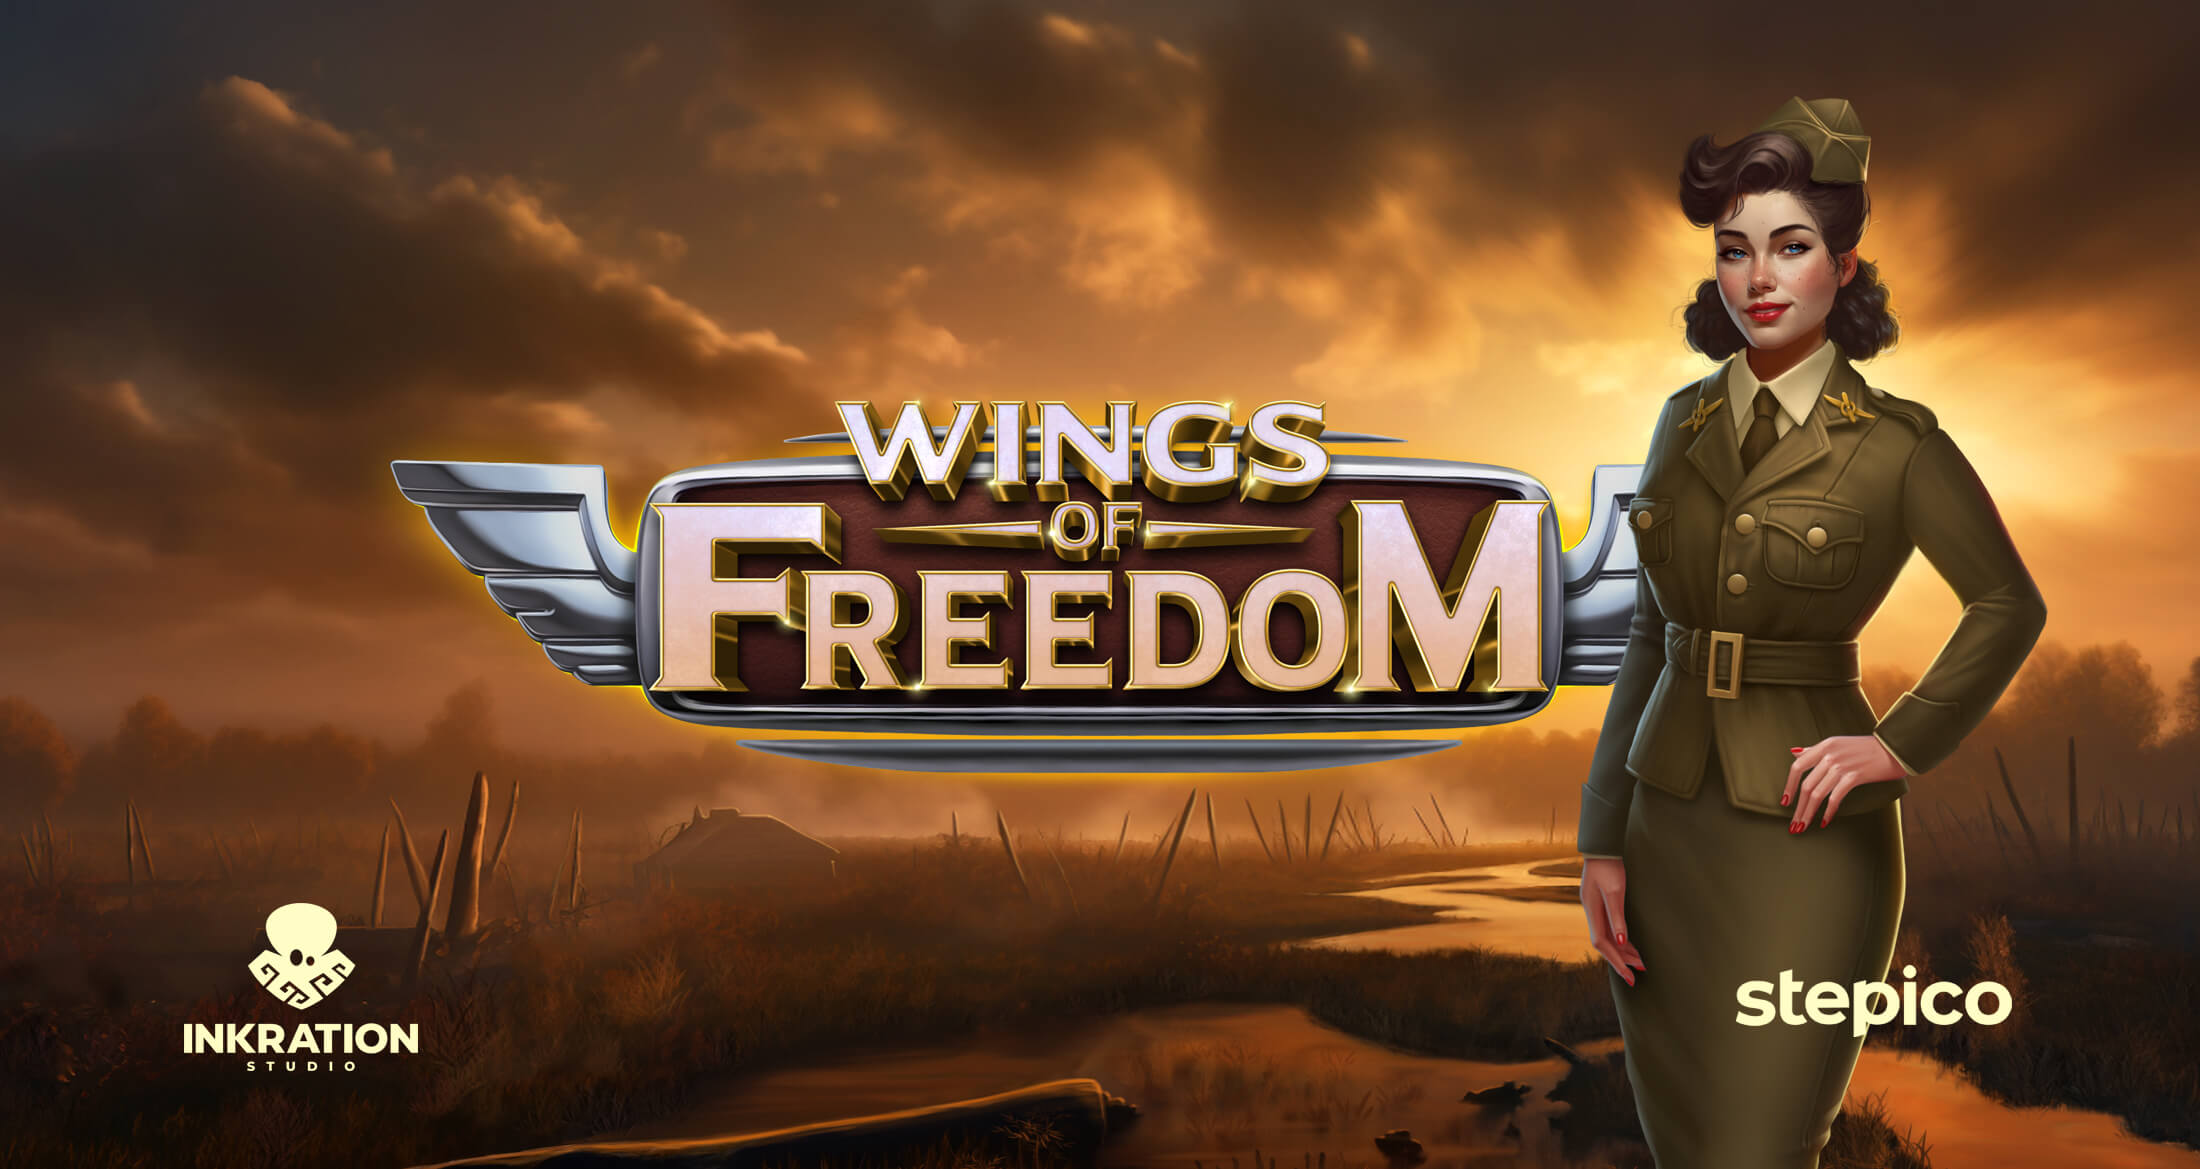 Wings of Freedom project art